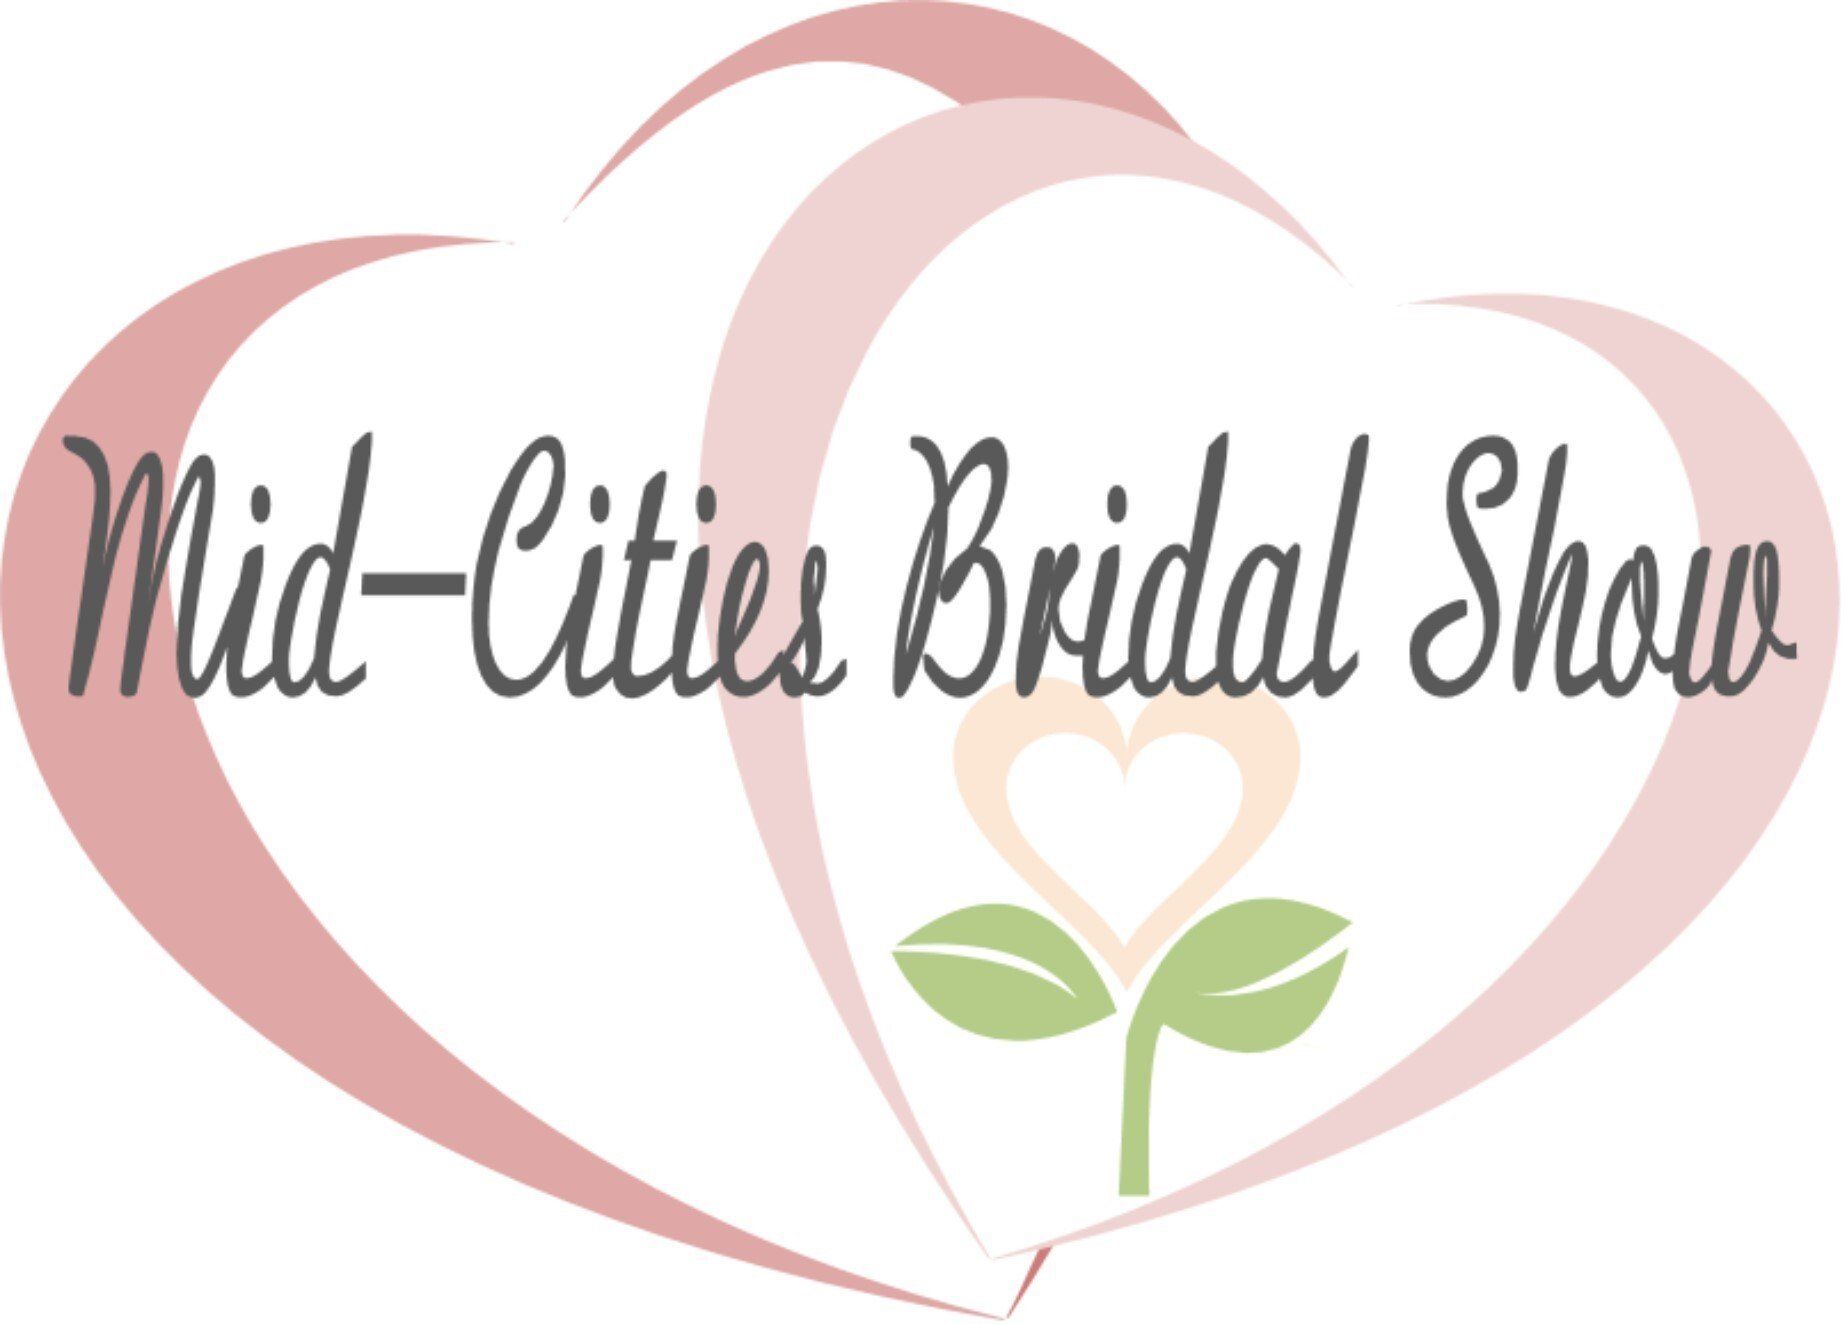 proud sponsor of the Mid Cities Bridal Show